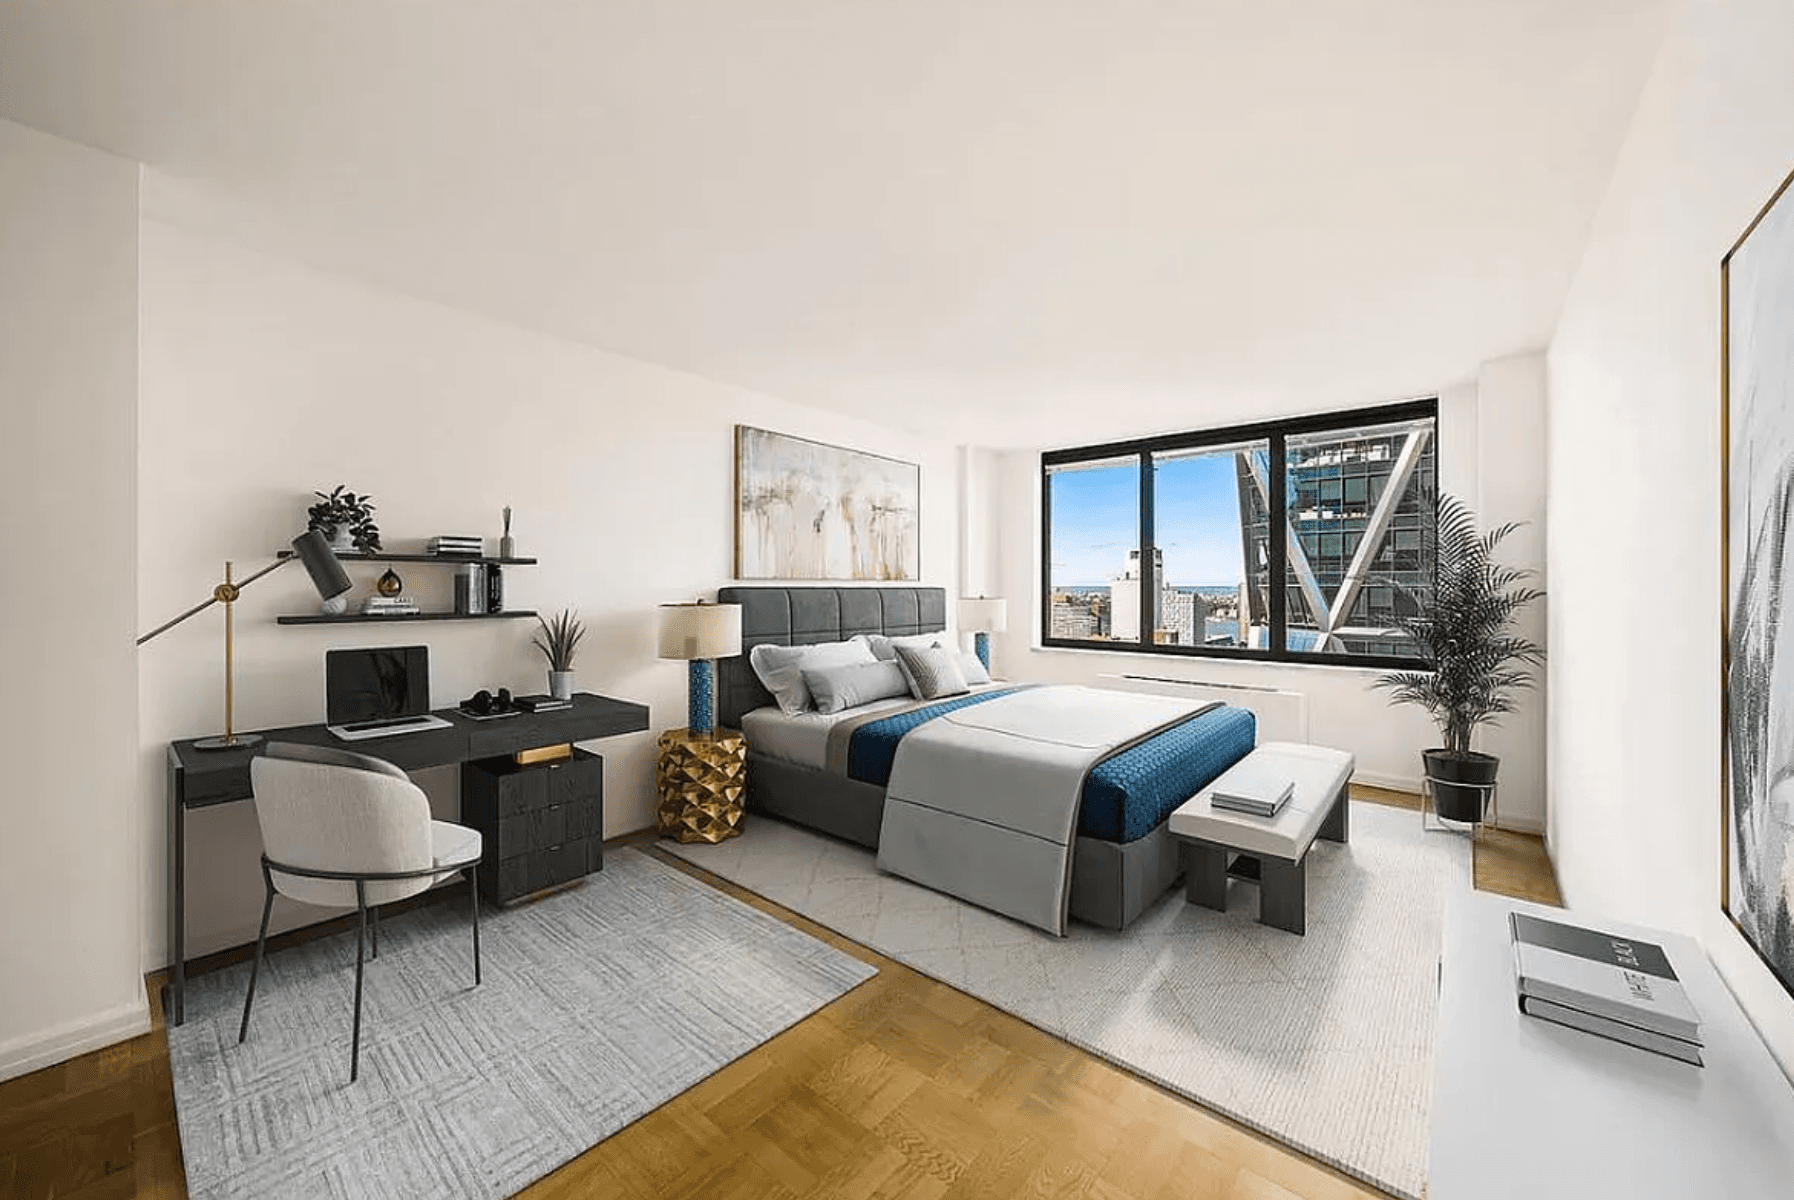 Luxury 2BED, 2 BATHS near Columbus Circle and Central Park